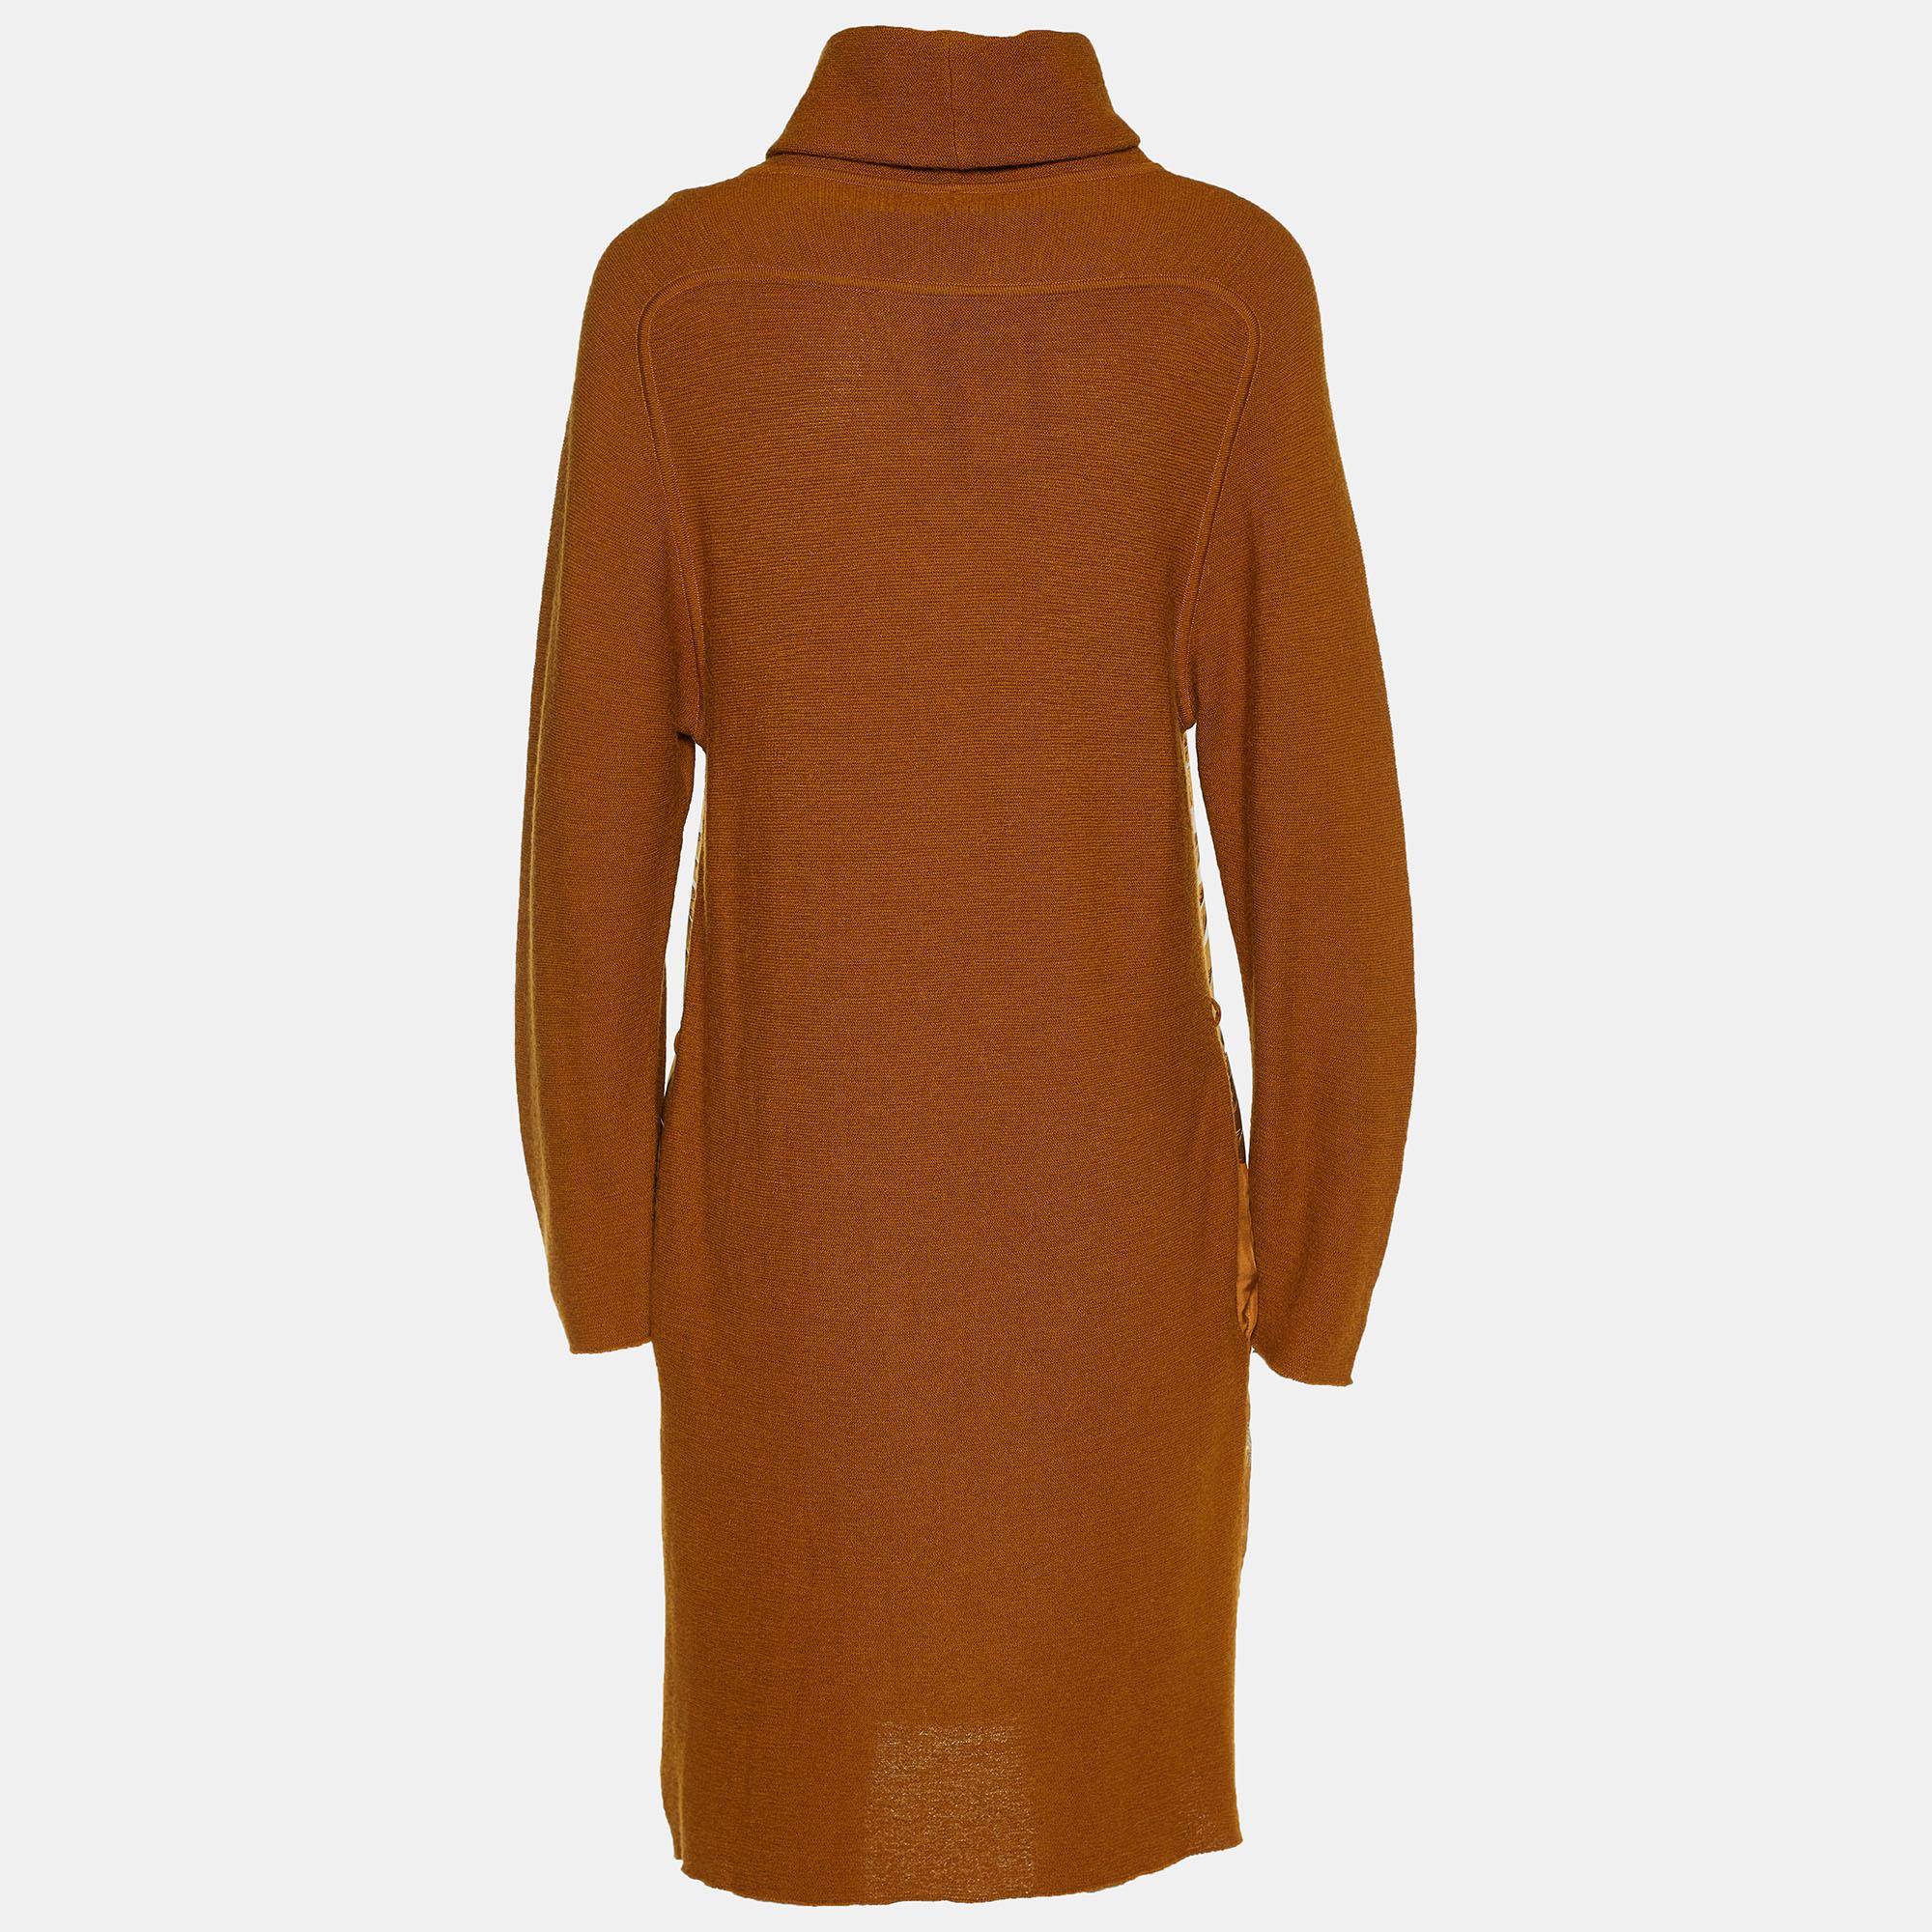 This brown dress from Hermes is made of silk and Alpaca knit and features a lovely printed pattern on the front. It flaunts a high neckline and long sleeves. Pair it with platform sandals and a clutch to rock a fashionable outing.

